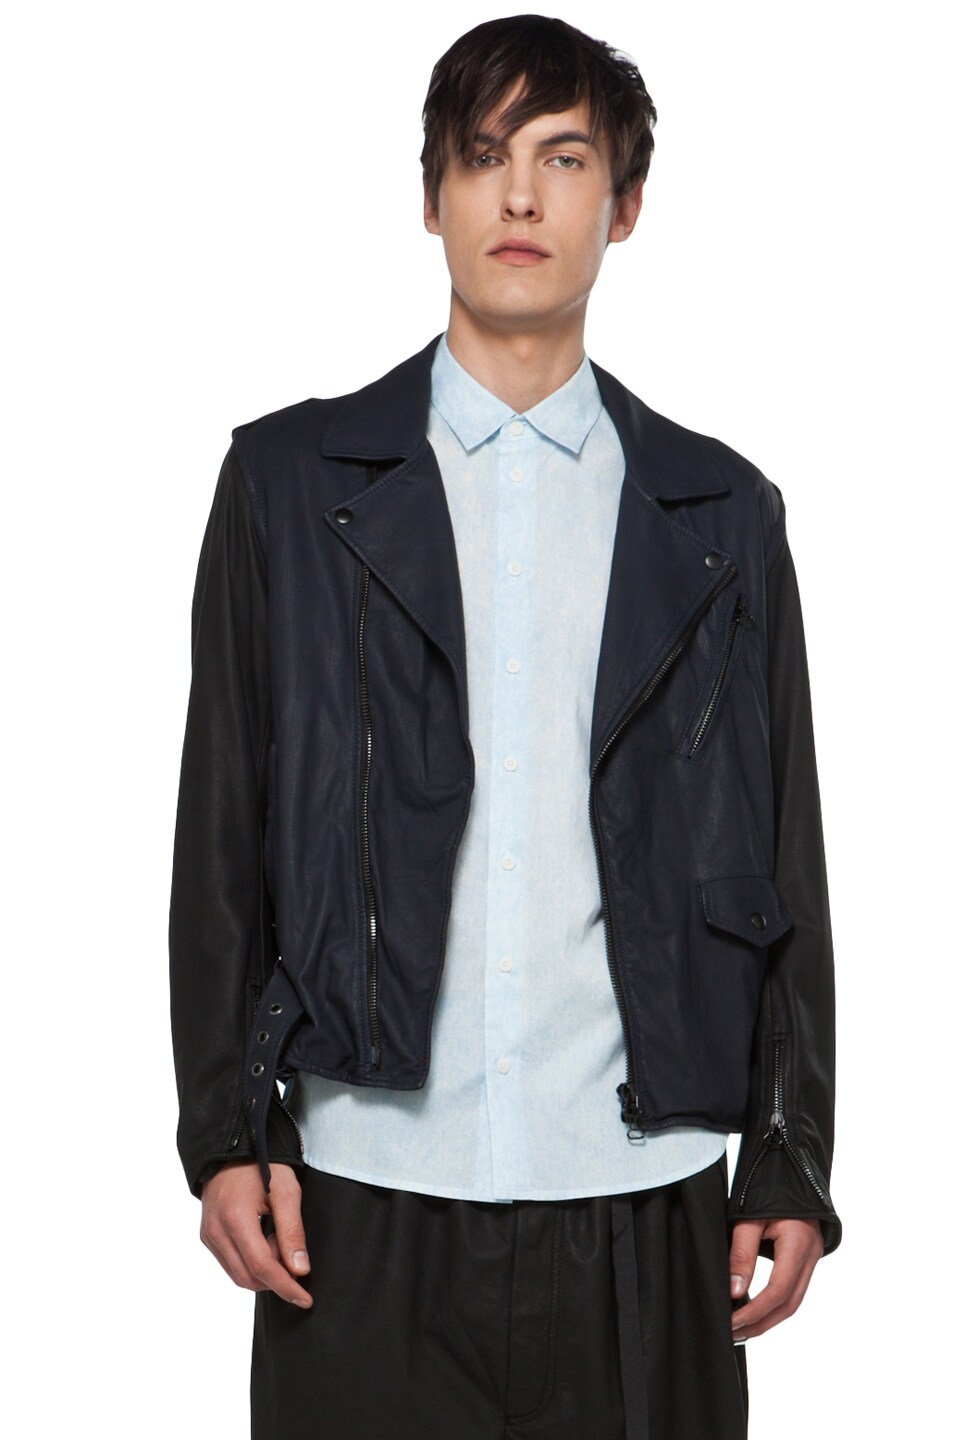 Image 1 of 3.1 phillip lim Motorcycle Jacket with Detachable Sleeves in Navy & Black